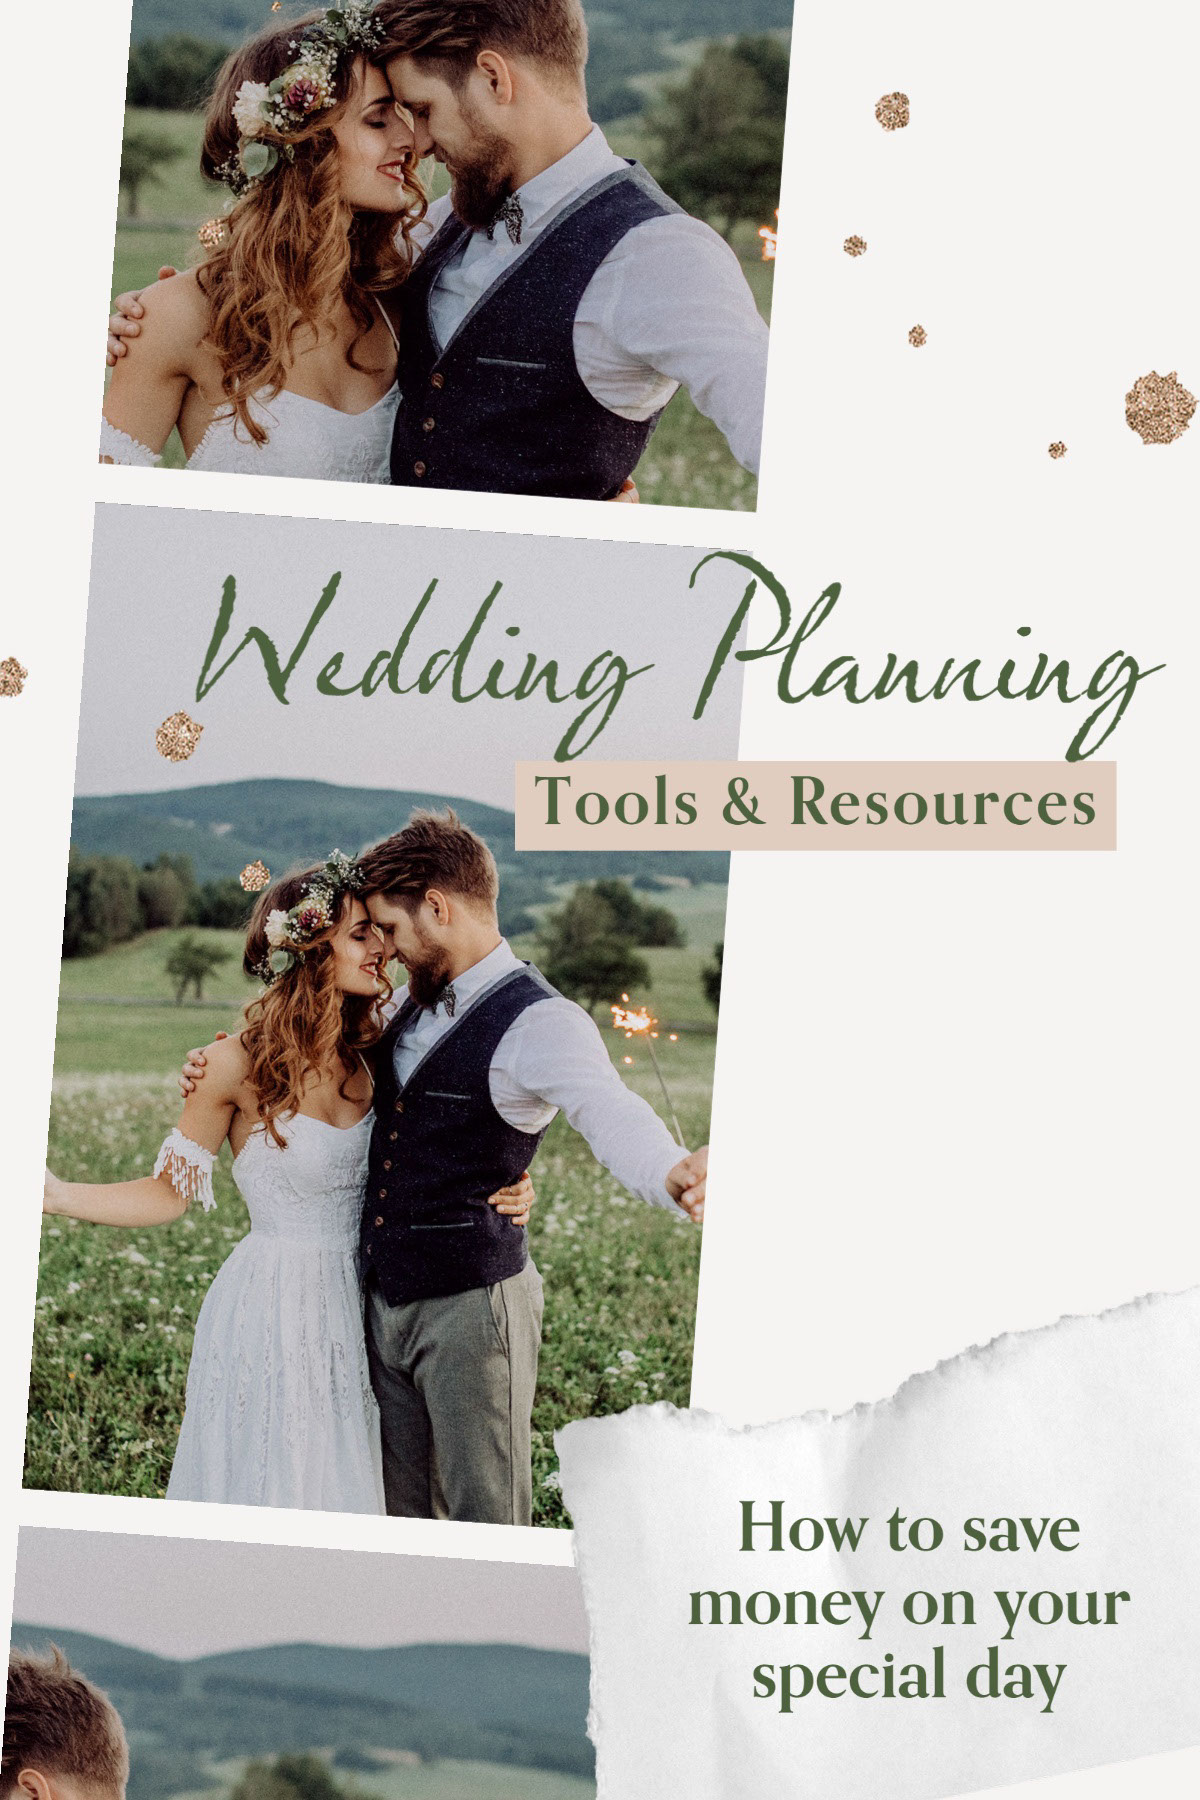 Green and White Wedding Planning Pinterest Post Wedding Planning Tools & Resources How to save money on your special day